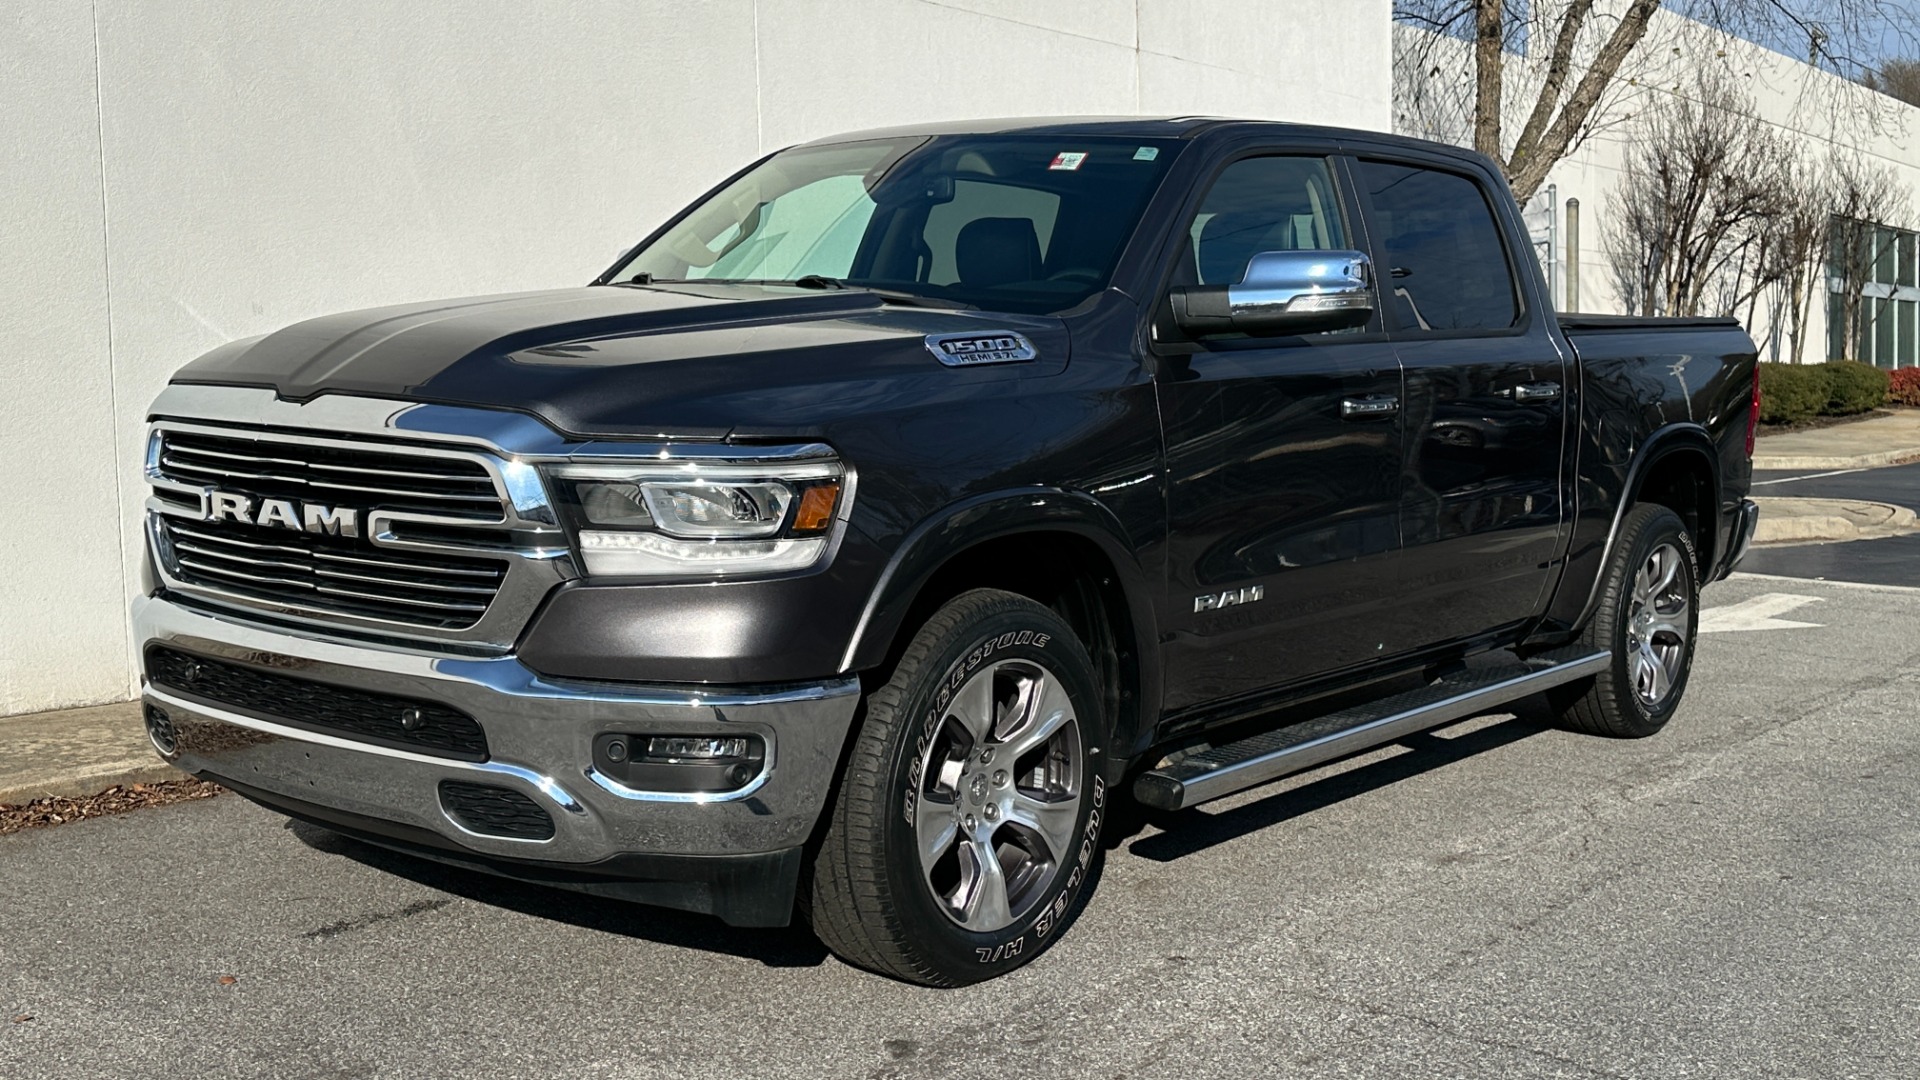 Used 2020 Ram 1500 LARAMIE / LEVEL 1 GROUP / PANORAMIC SUNROOF / 20IN WHEELS / LEATHER for sale $44,995 at Formula Imports in Charlotte NC 28227 2